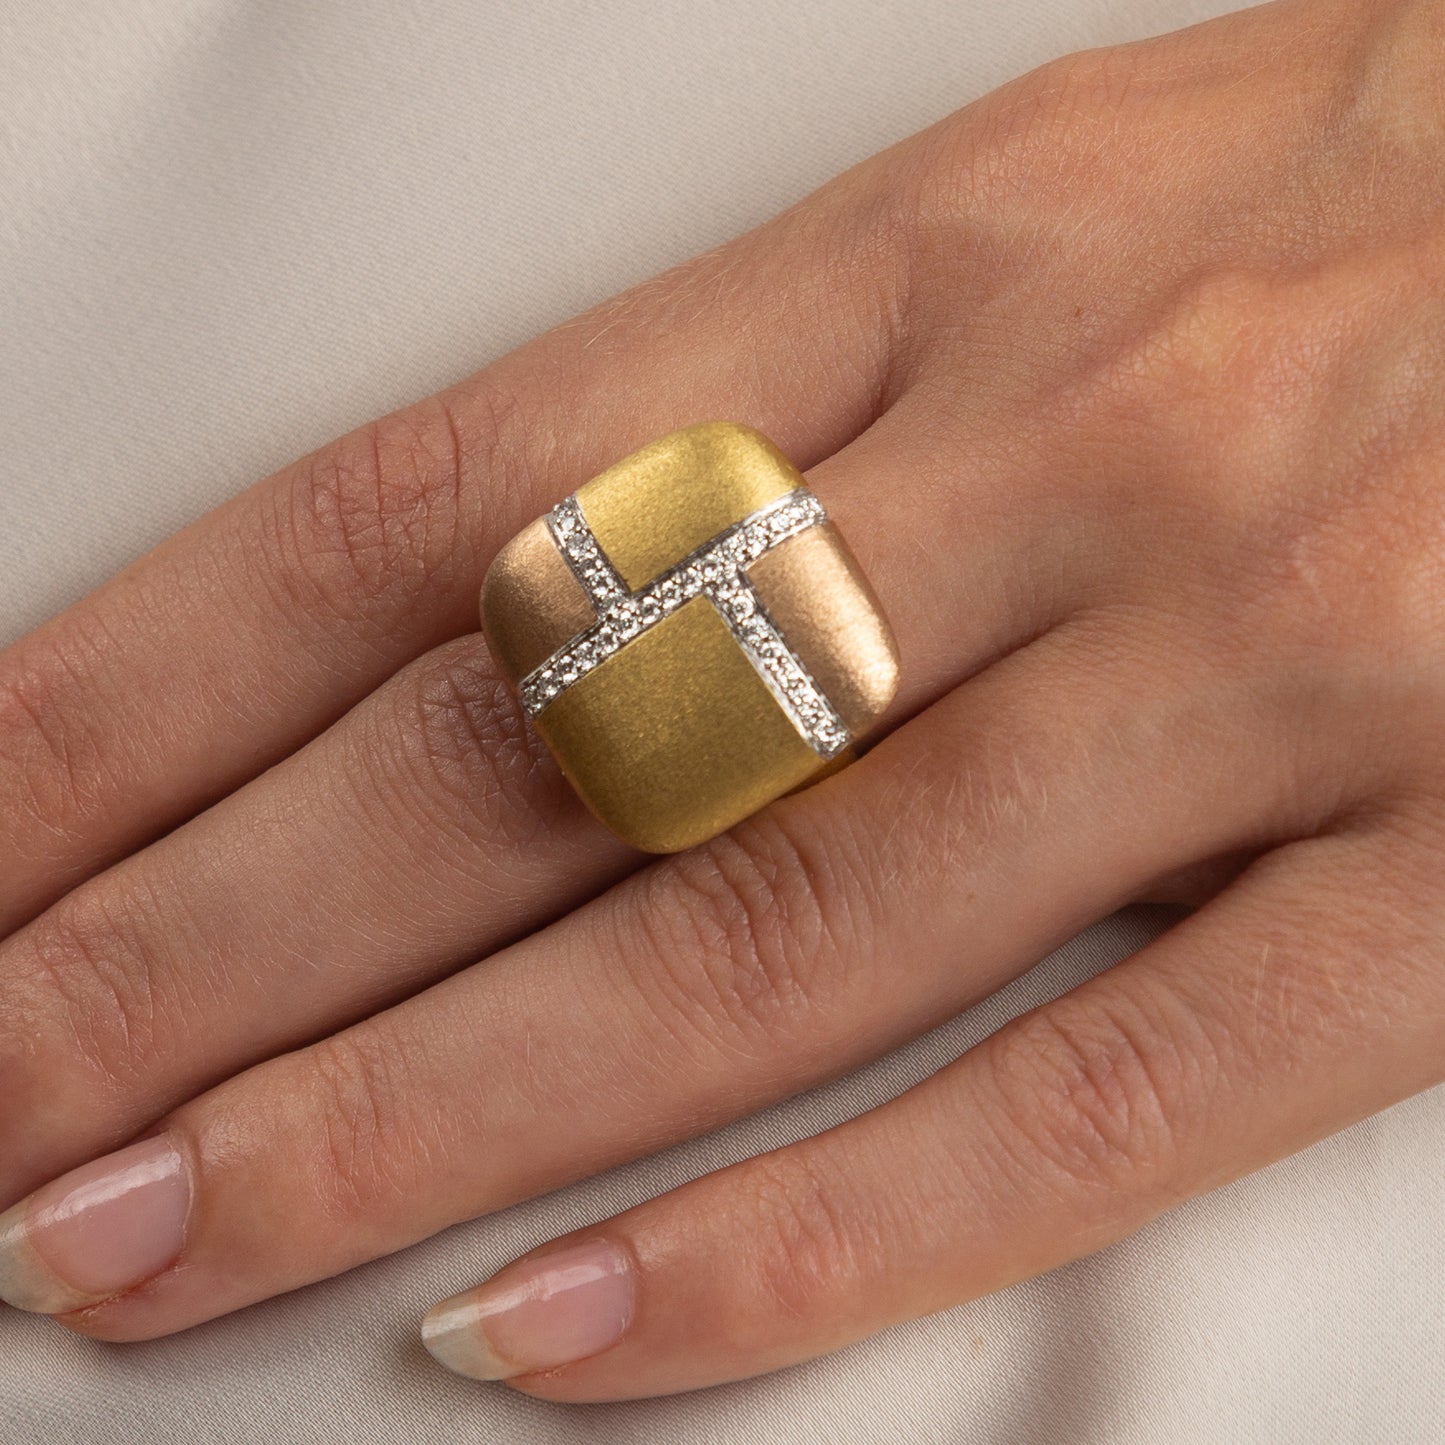 The Gold Cushion Ring